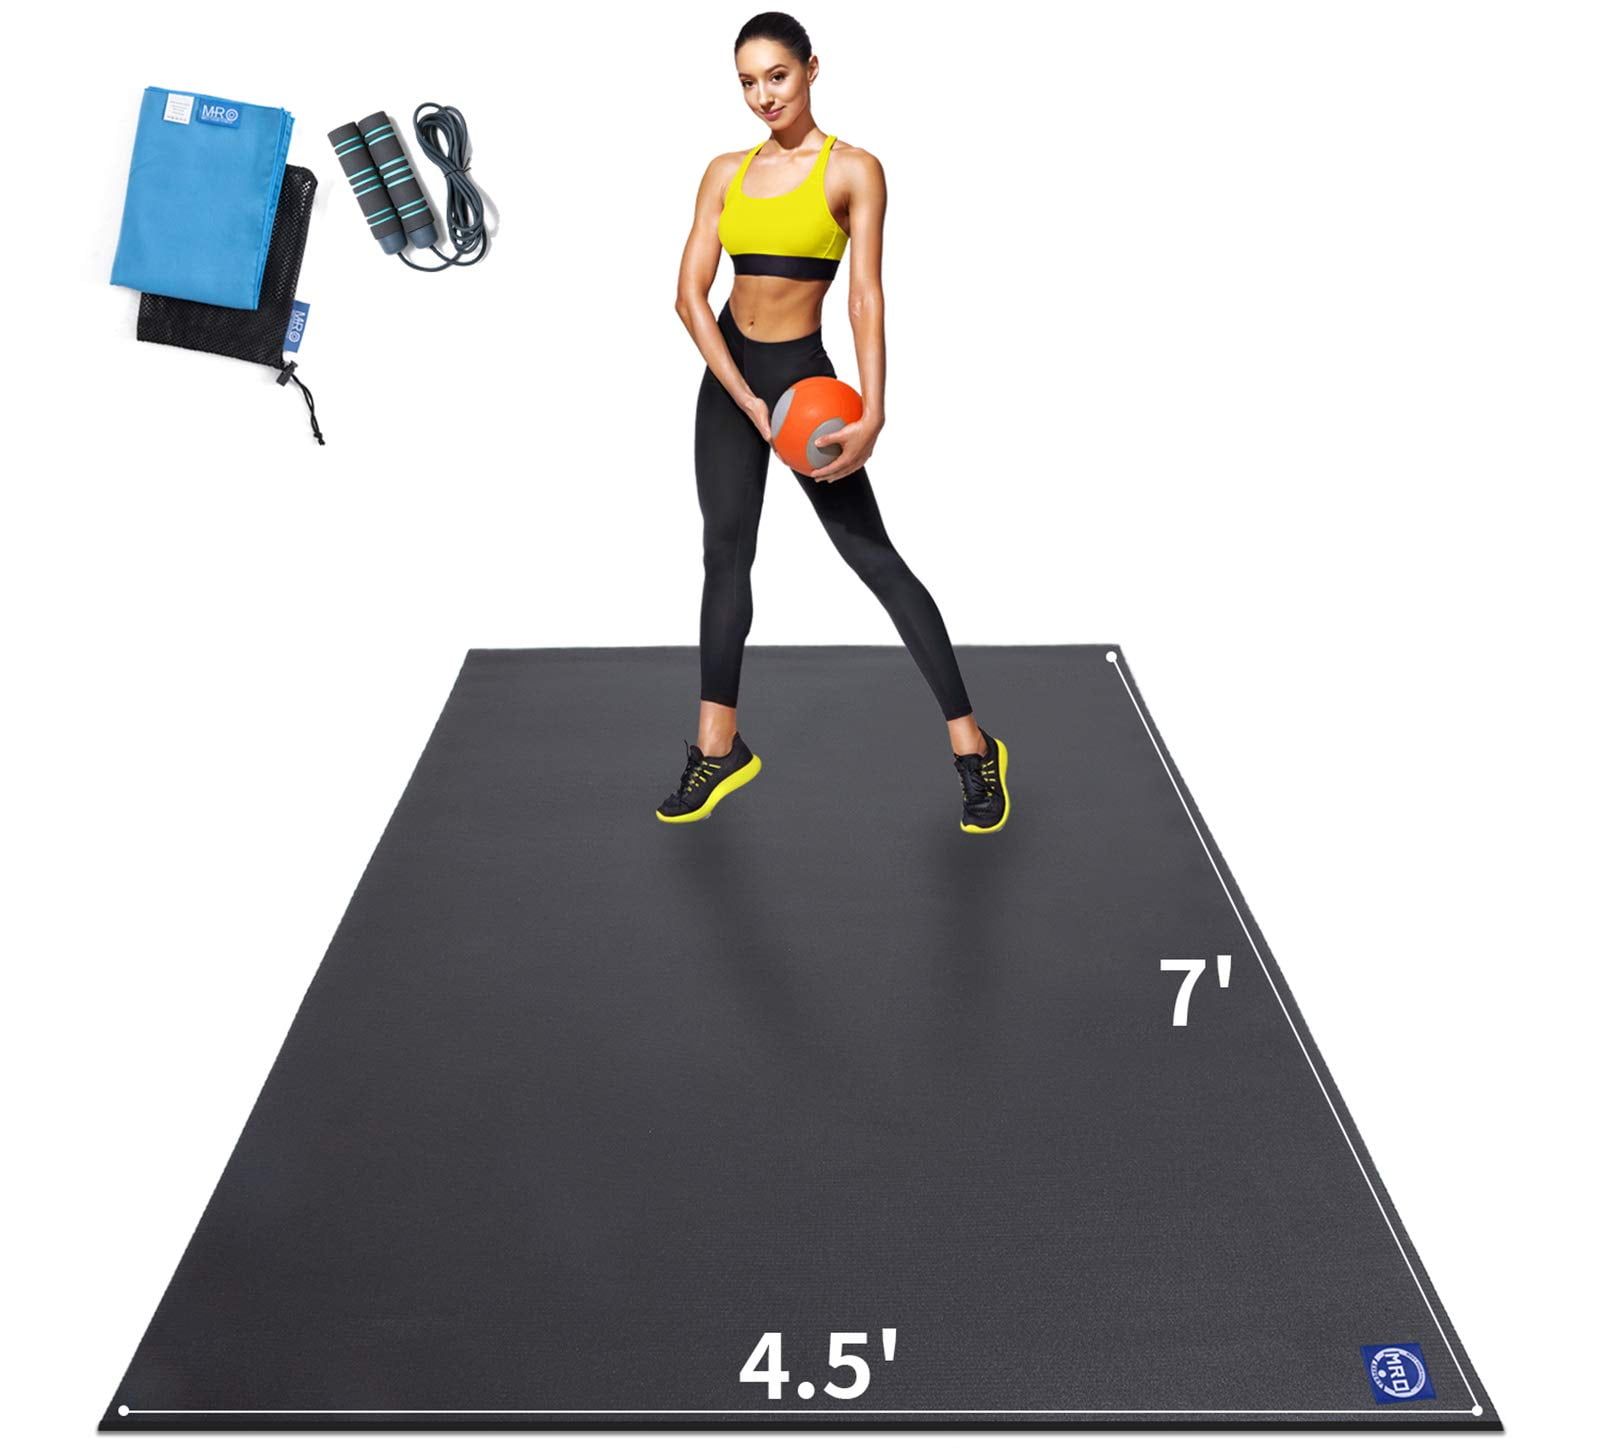 Premium Large Exercise Mat 8' x 4' x 1/4" Thick Fitness Workout Gym Mats Blue 